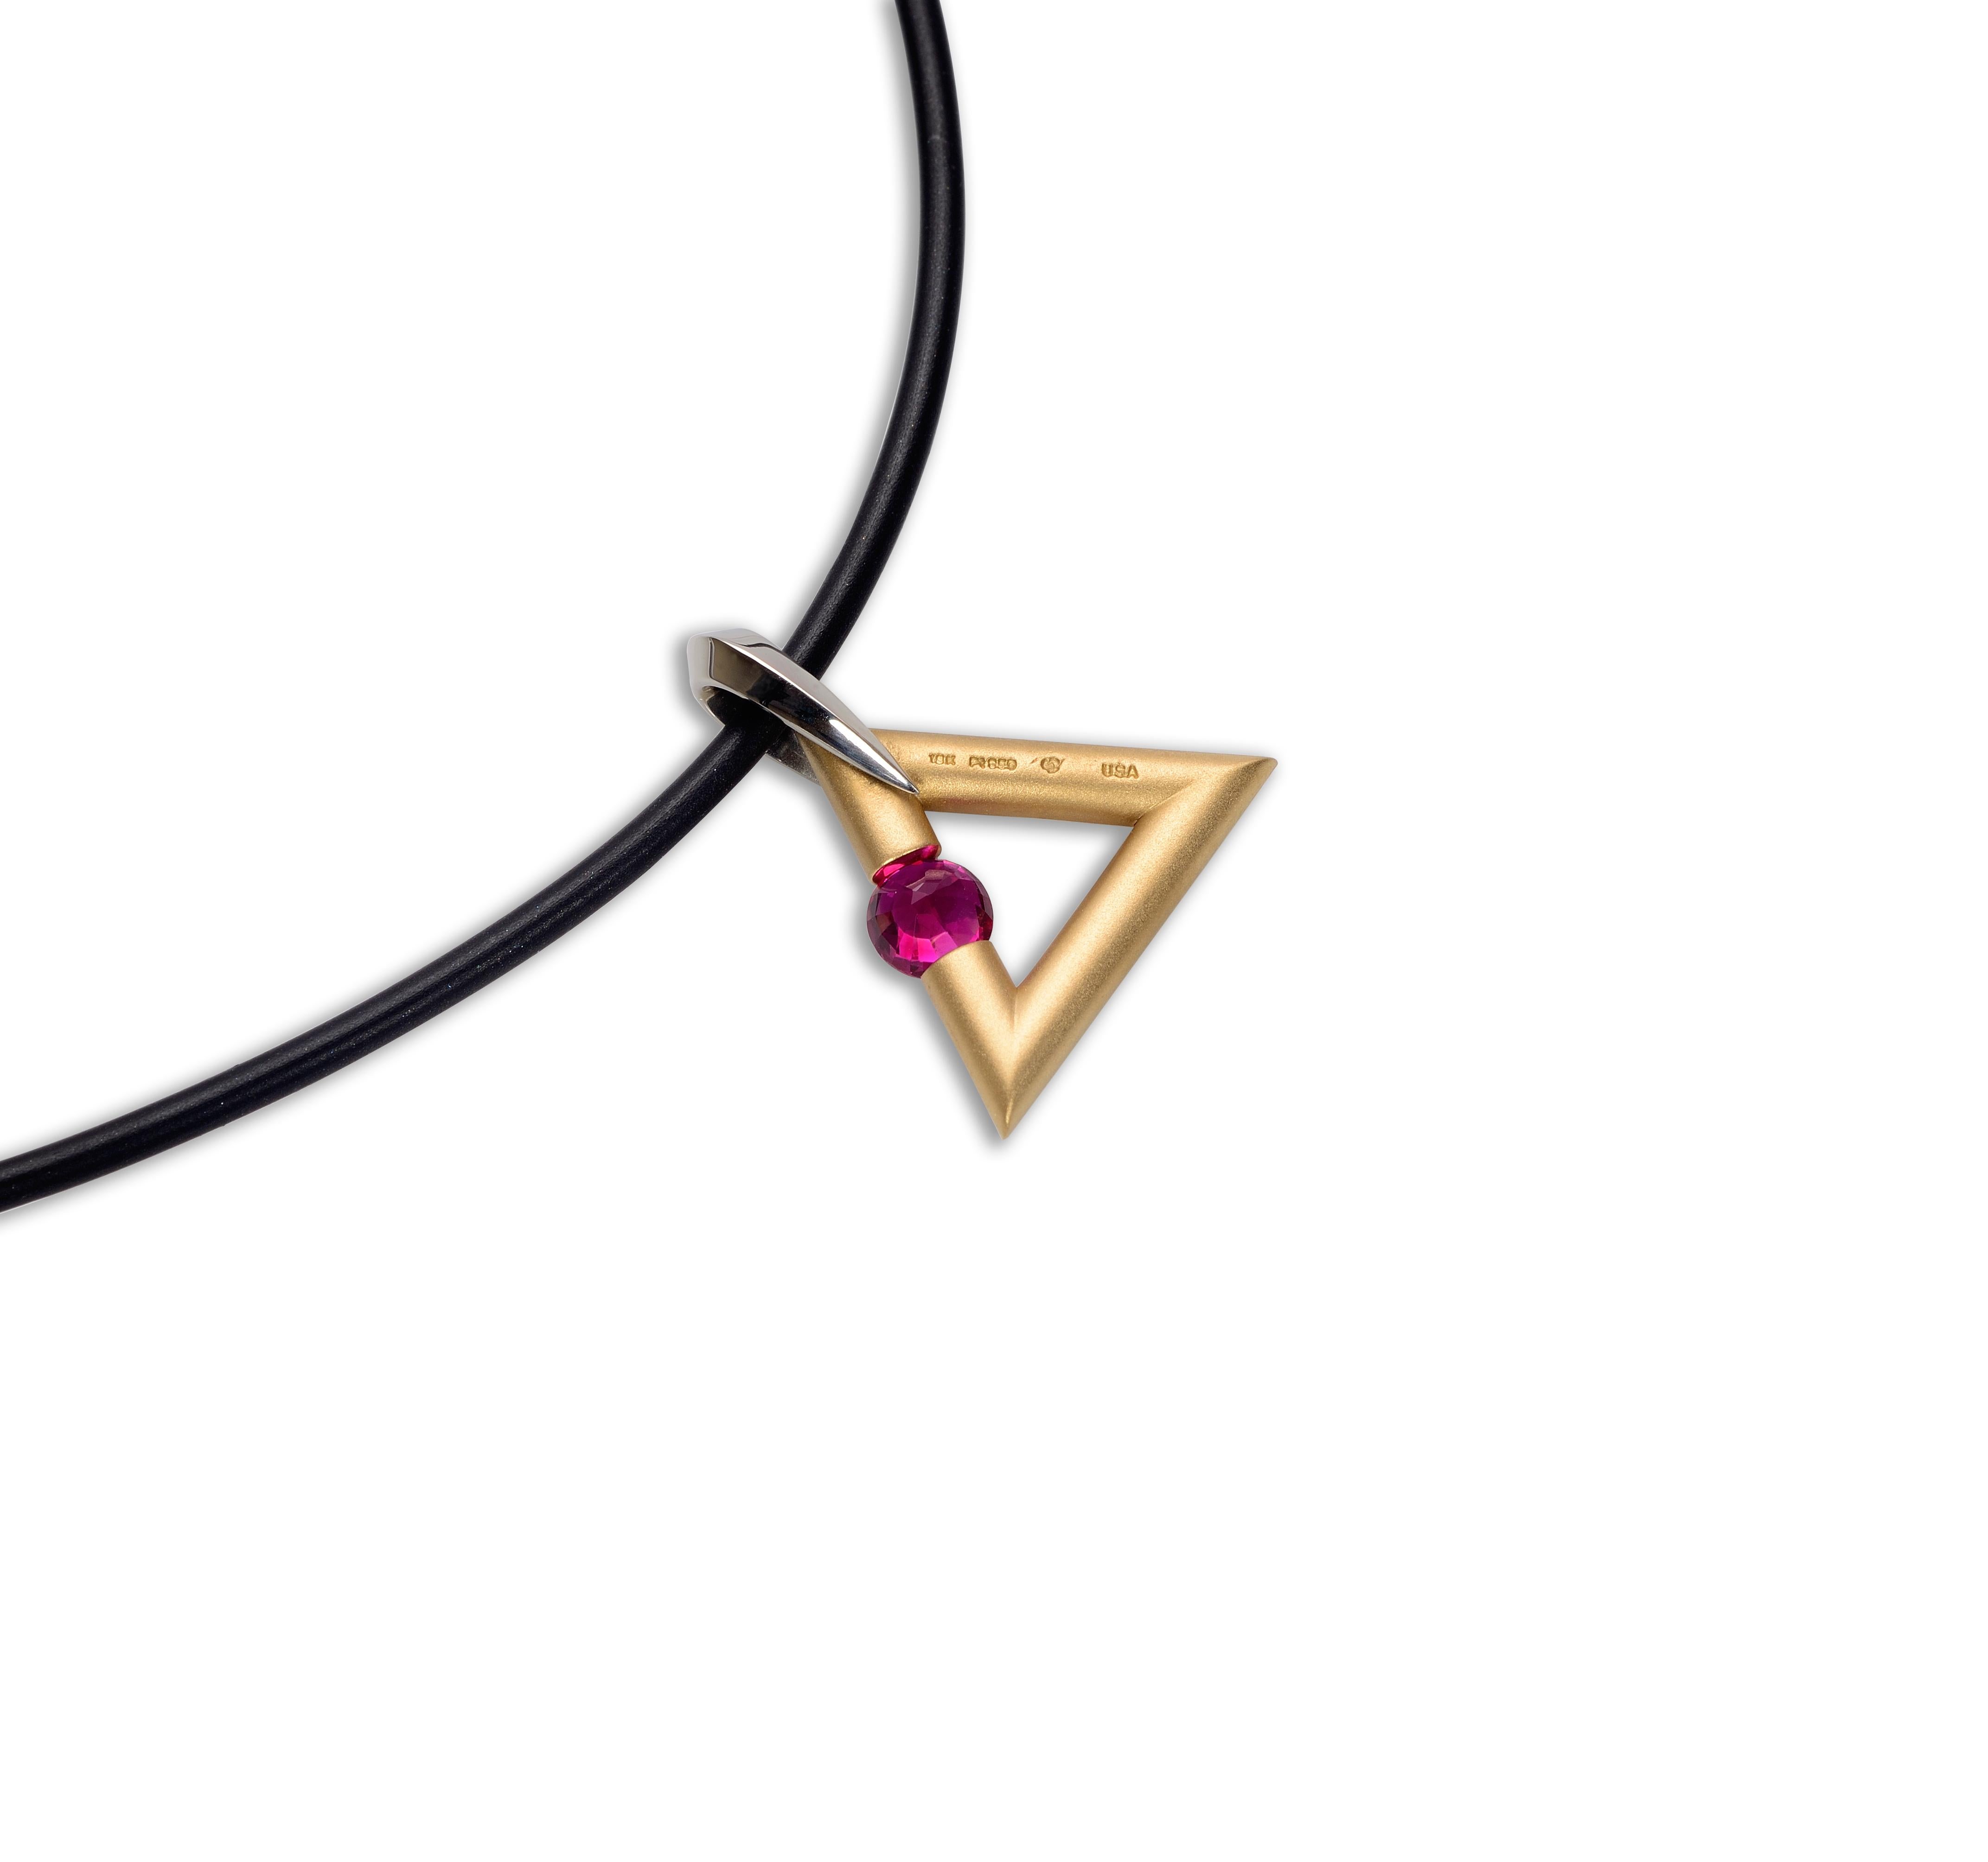 The Steven Kretchmer Logo/Triangle Shaped Pendant with a tension-set ruby is handcrafted in a matte 18K yellow gold with a shiny platinum bail. The reddish pink round cut 0.63ct ruby is tension-set in the side of the triangle shape. This pendant is